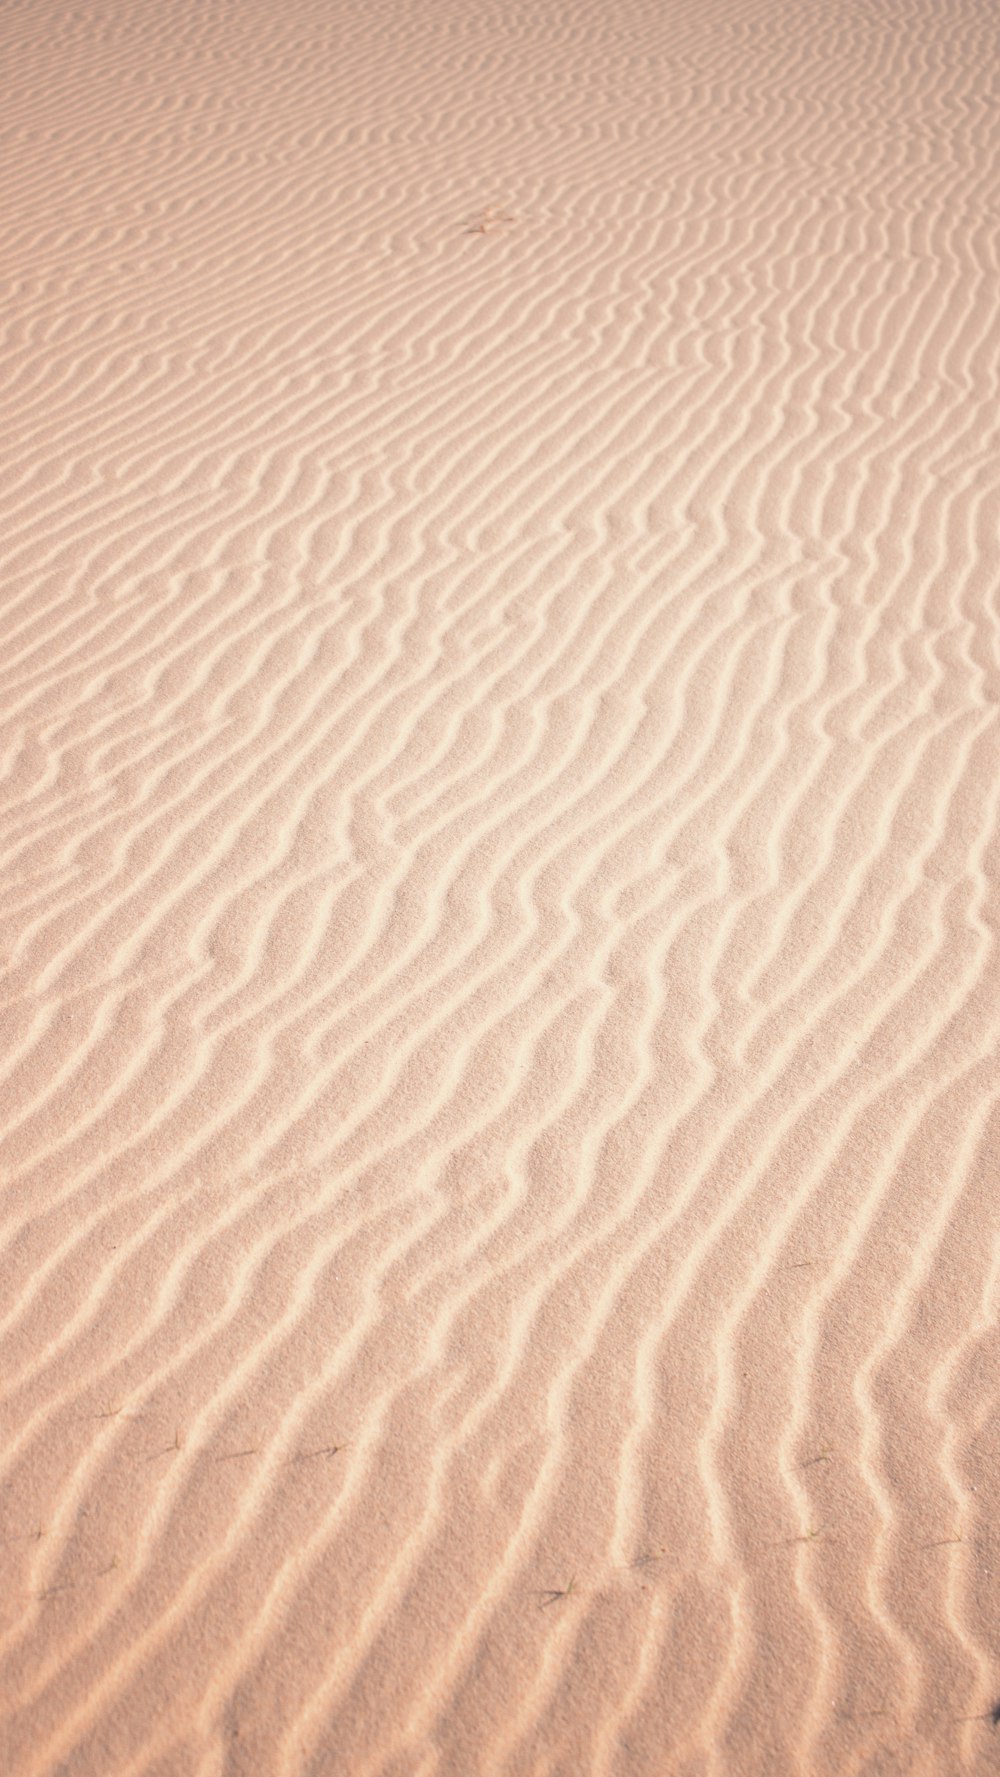 brown sand with white sand